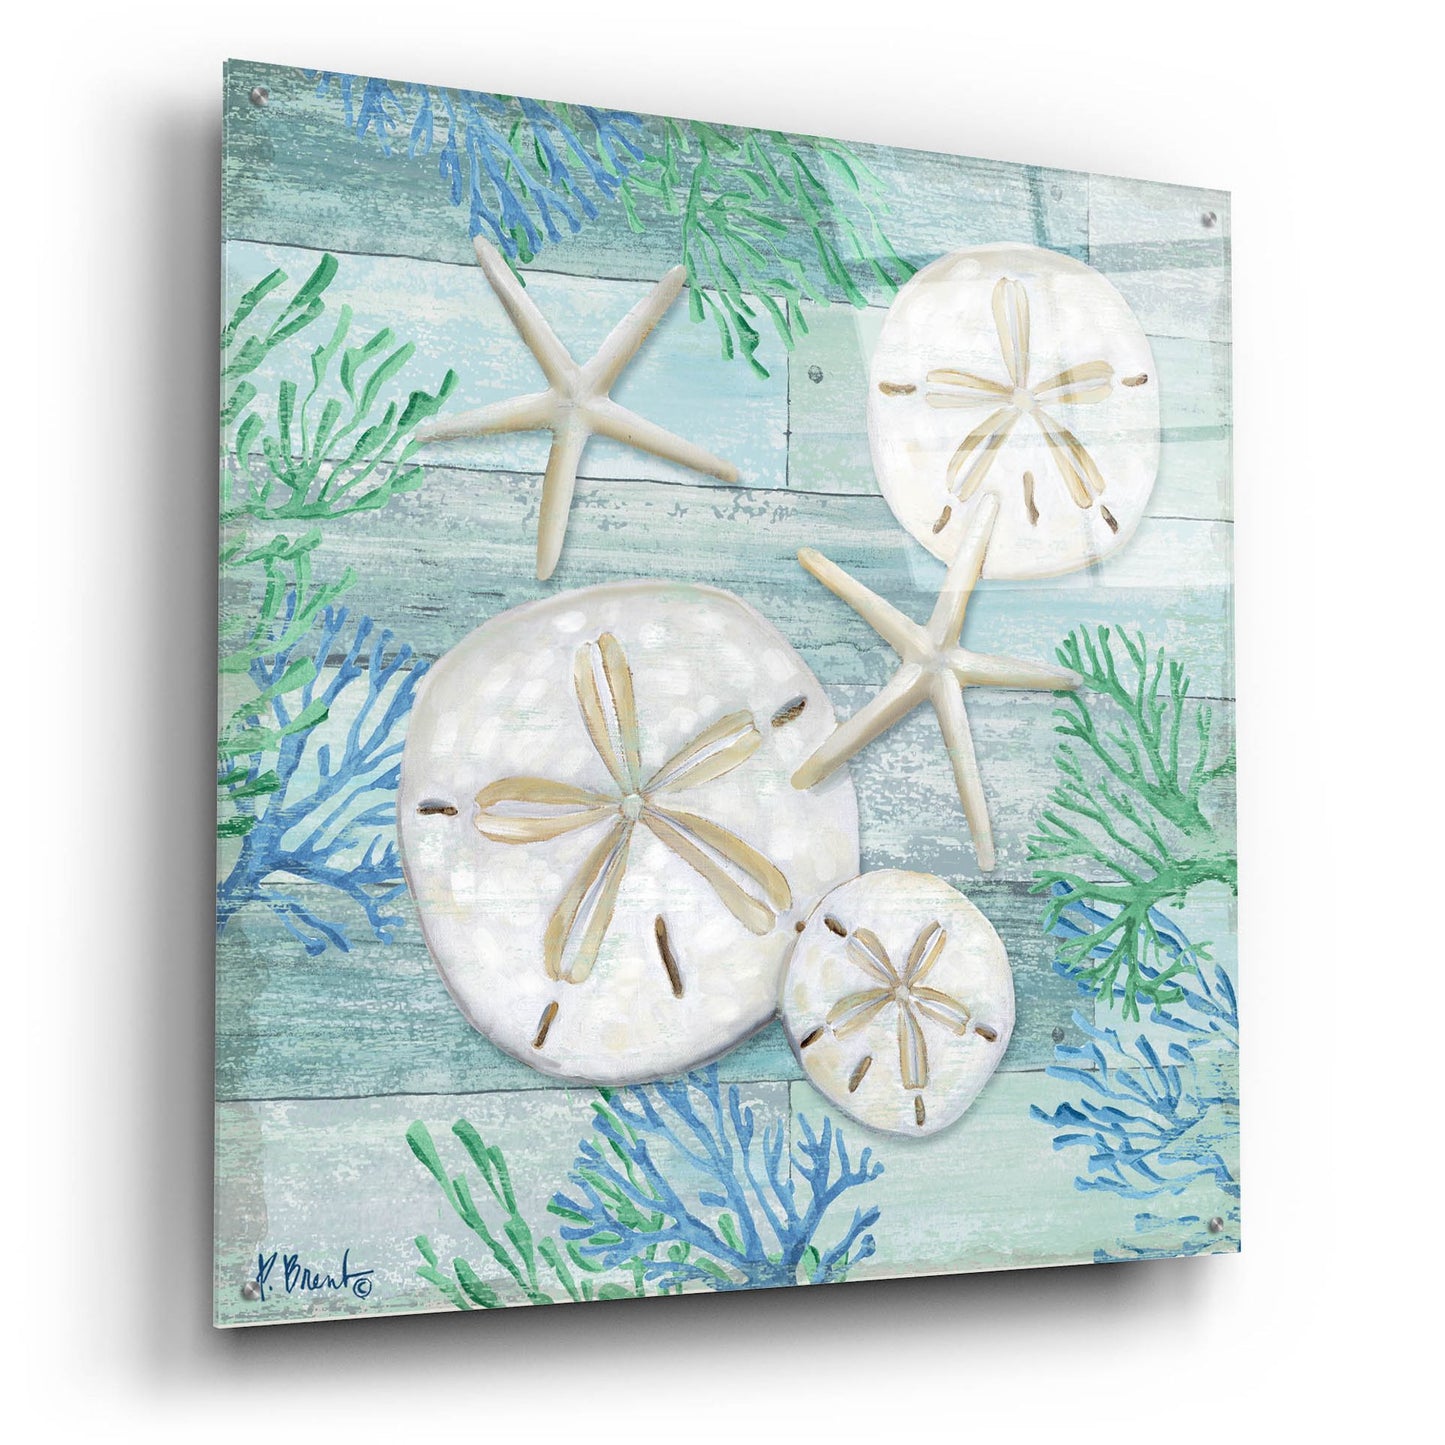 Epic Art 'Clearwater Shells I' by Paul Brent, Acrylic Glass Wall Art,36x36